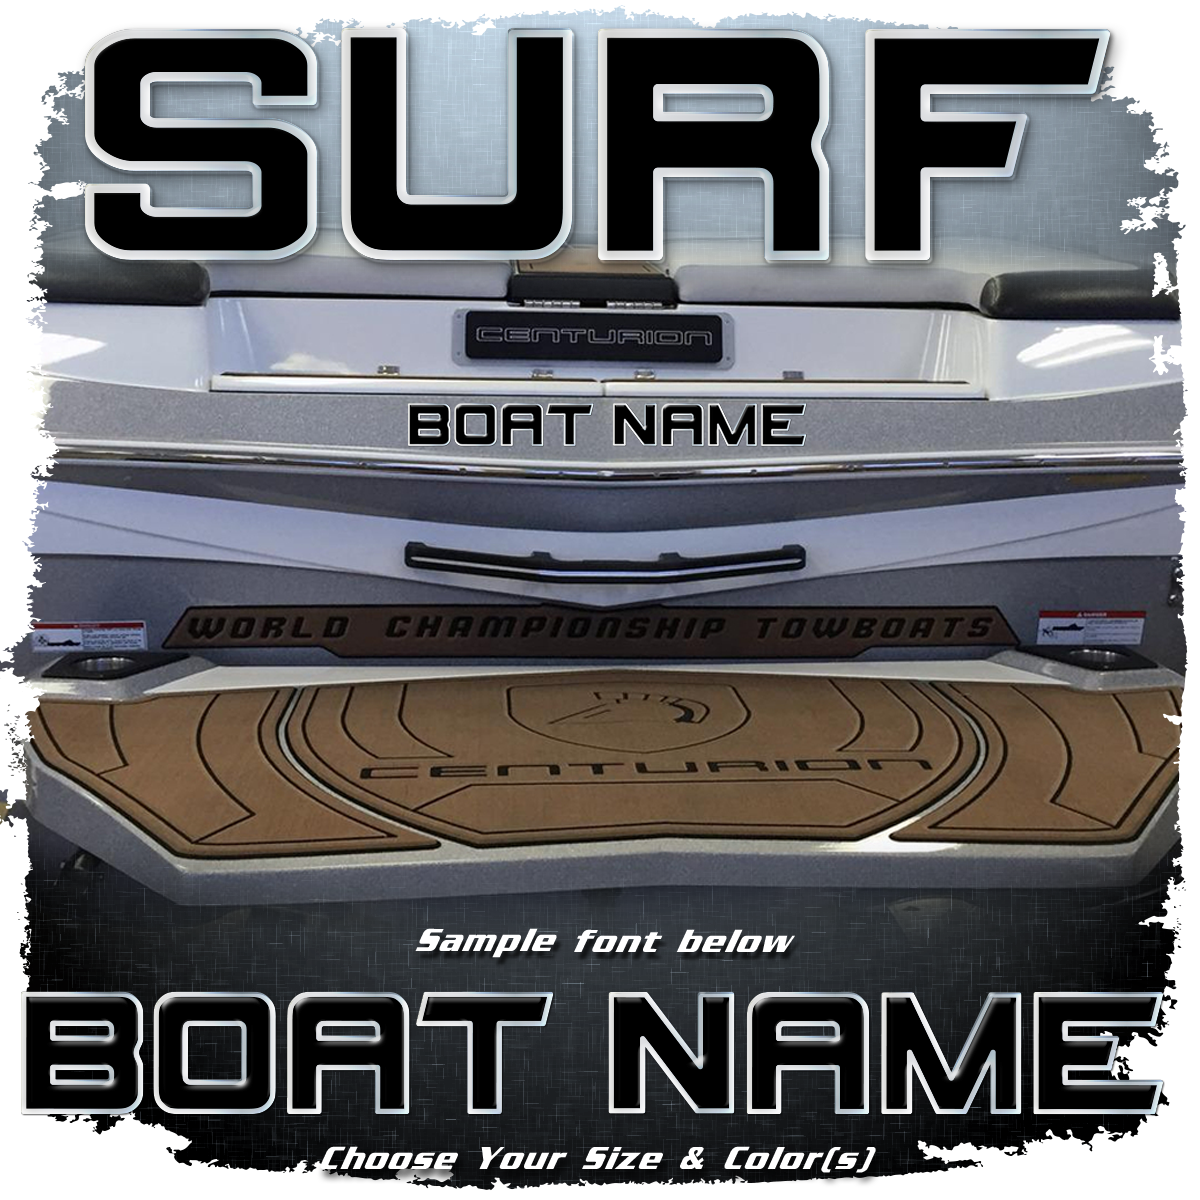 Domed Boat Name in the Centurion 2012-17 Surf Font, Choose Your Own Colors